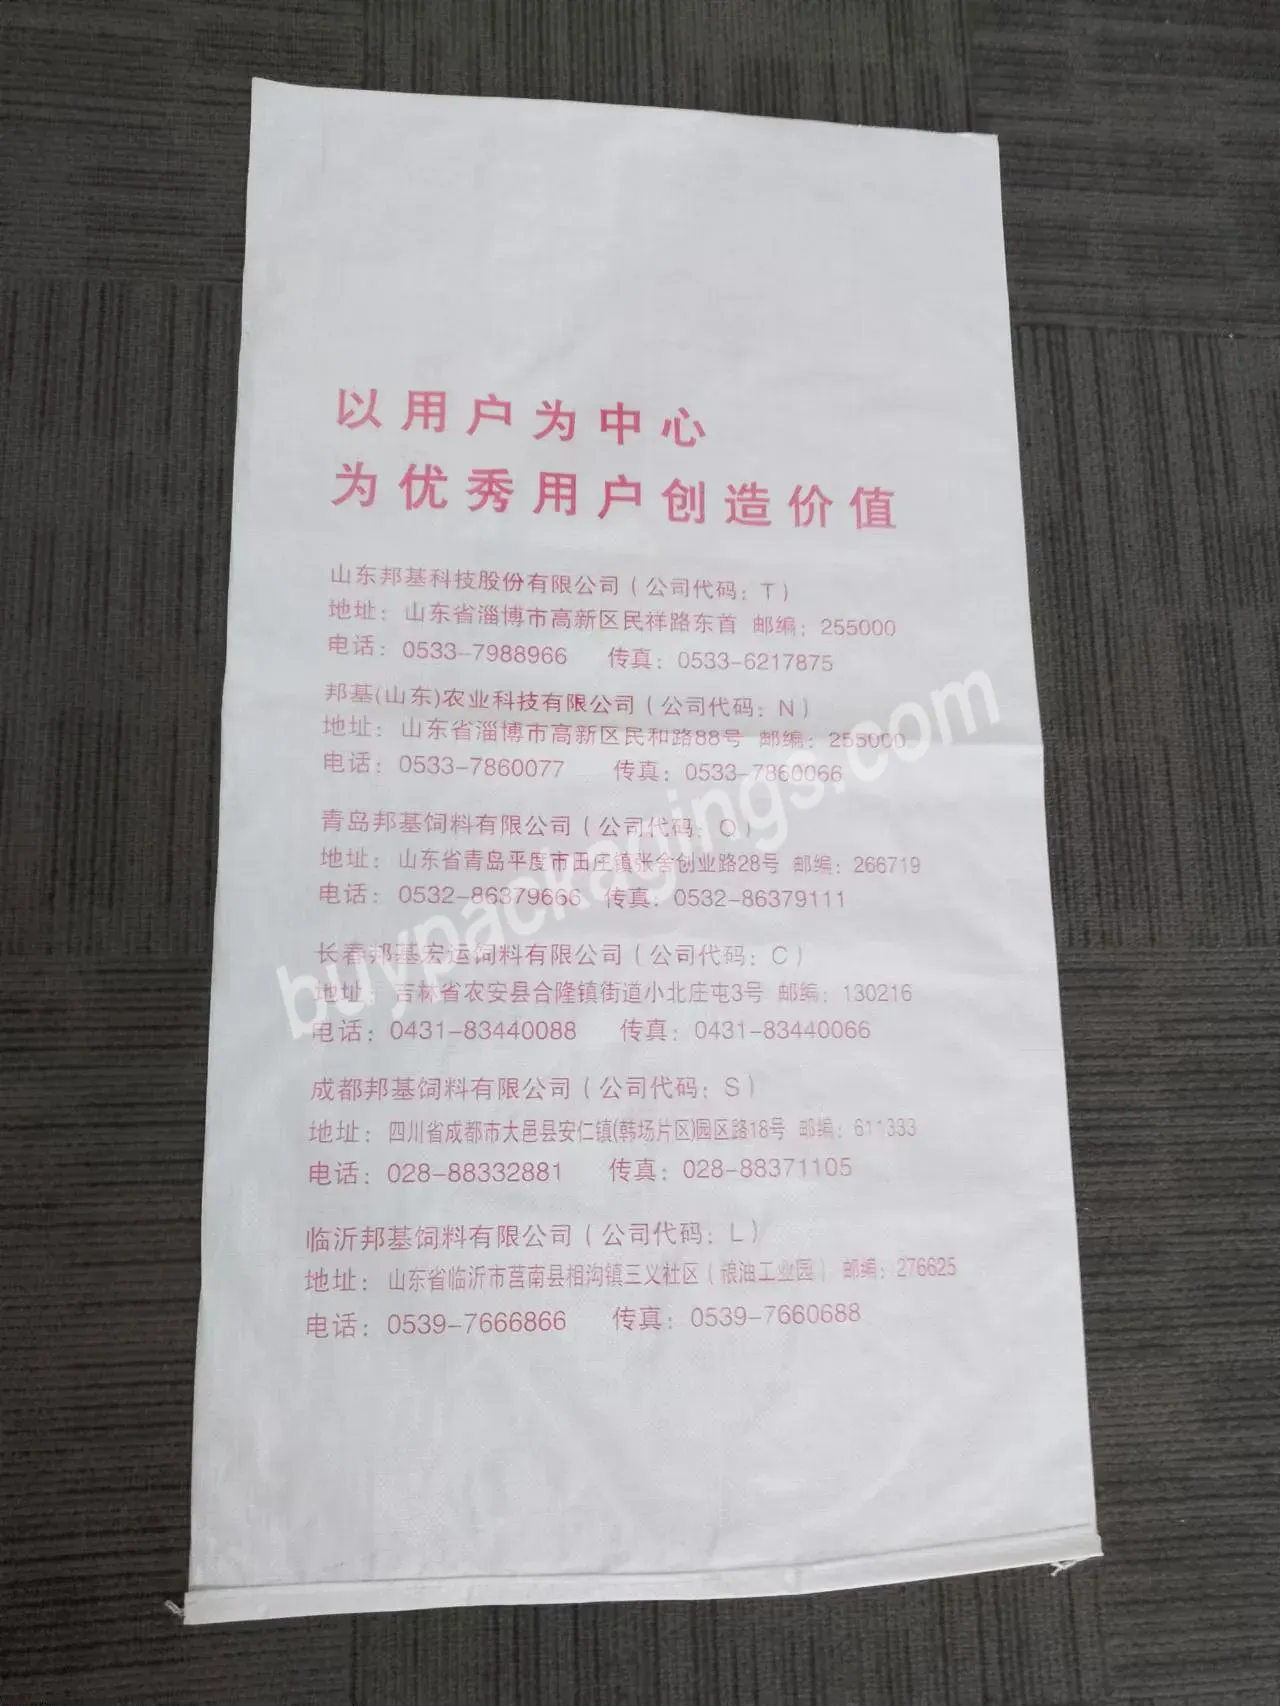 25kg Pp Woven Compound Fertilizer Colorful Printing Rice Pp Woven Bags With Laminated